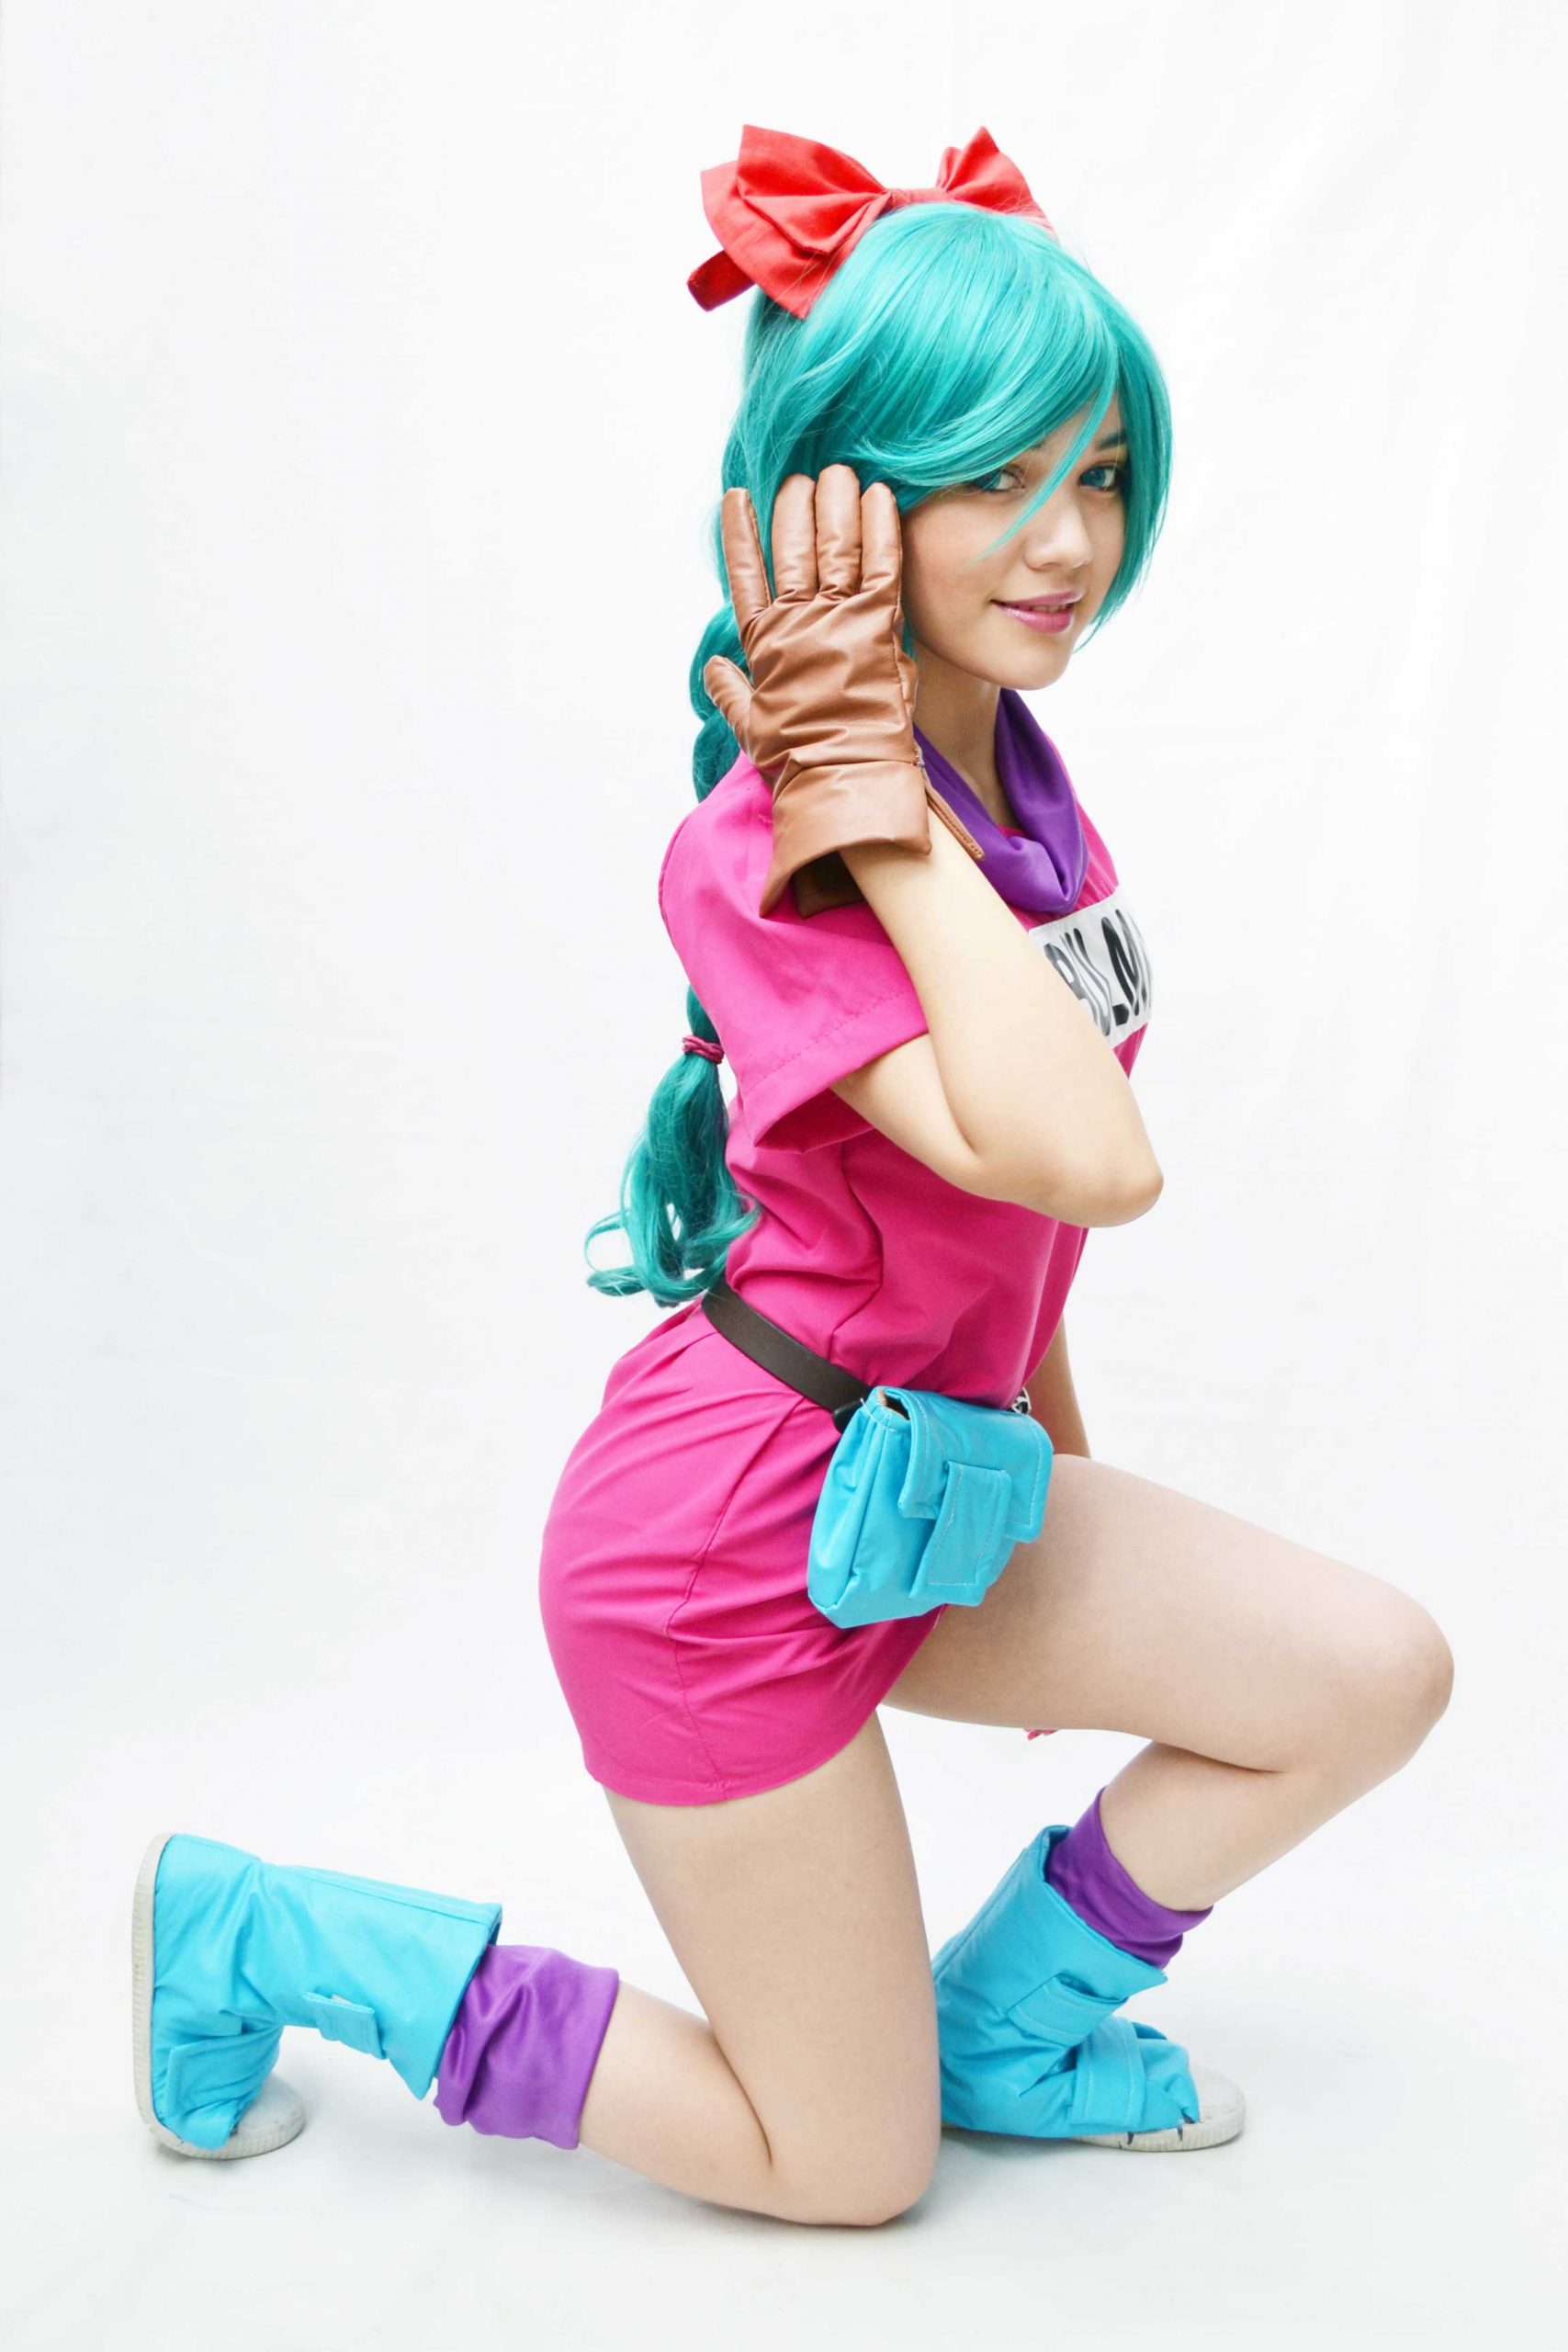 70+ Hot Pictures Of Bulma From Dragon Ball Z Are Sure To Get Your Heart Thumping Fast 13